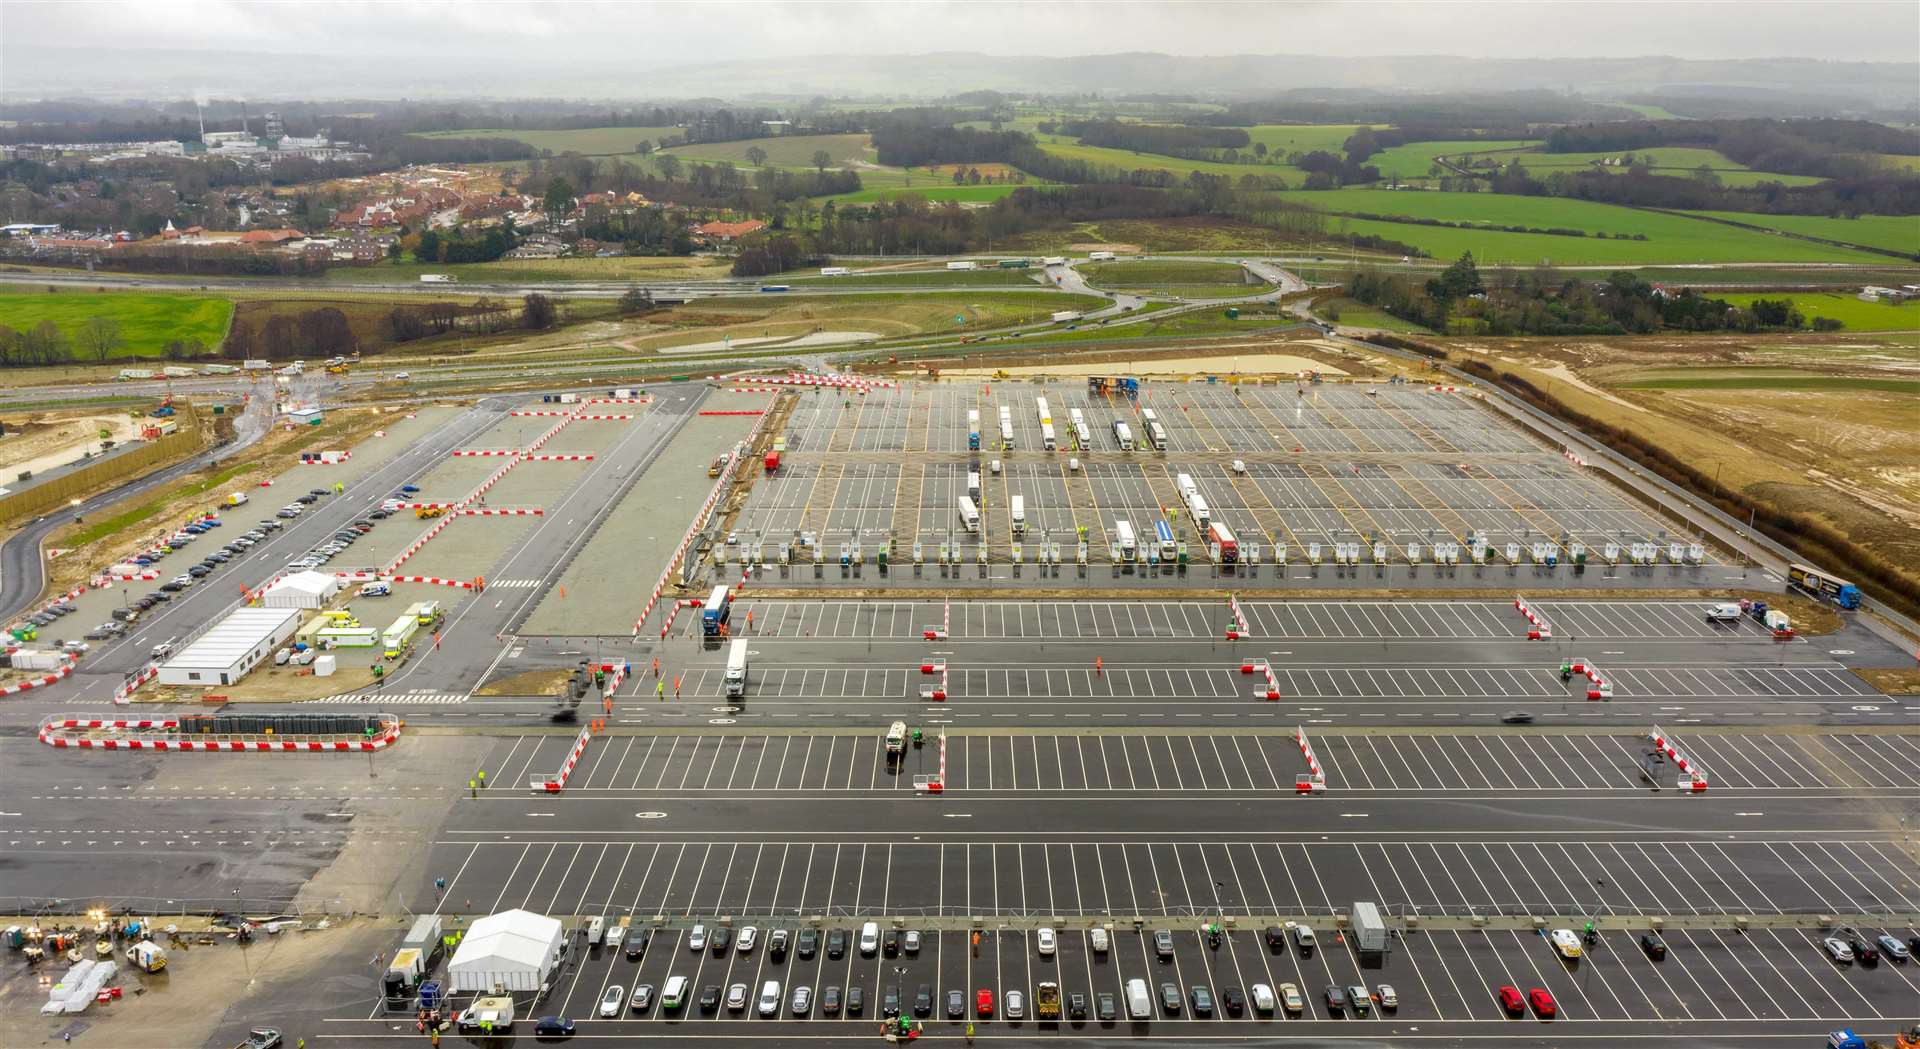 The 'Sevington Inland Border Facility' from above. Picture: Esprit Drone Services